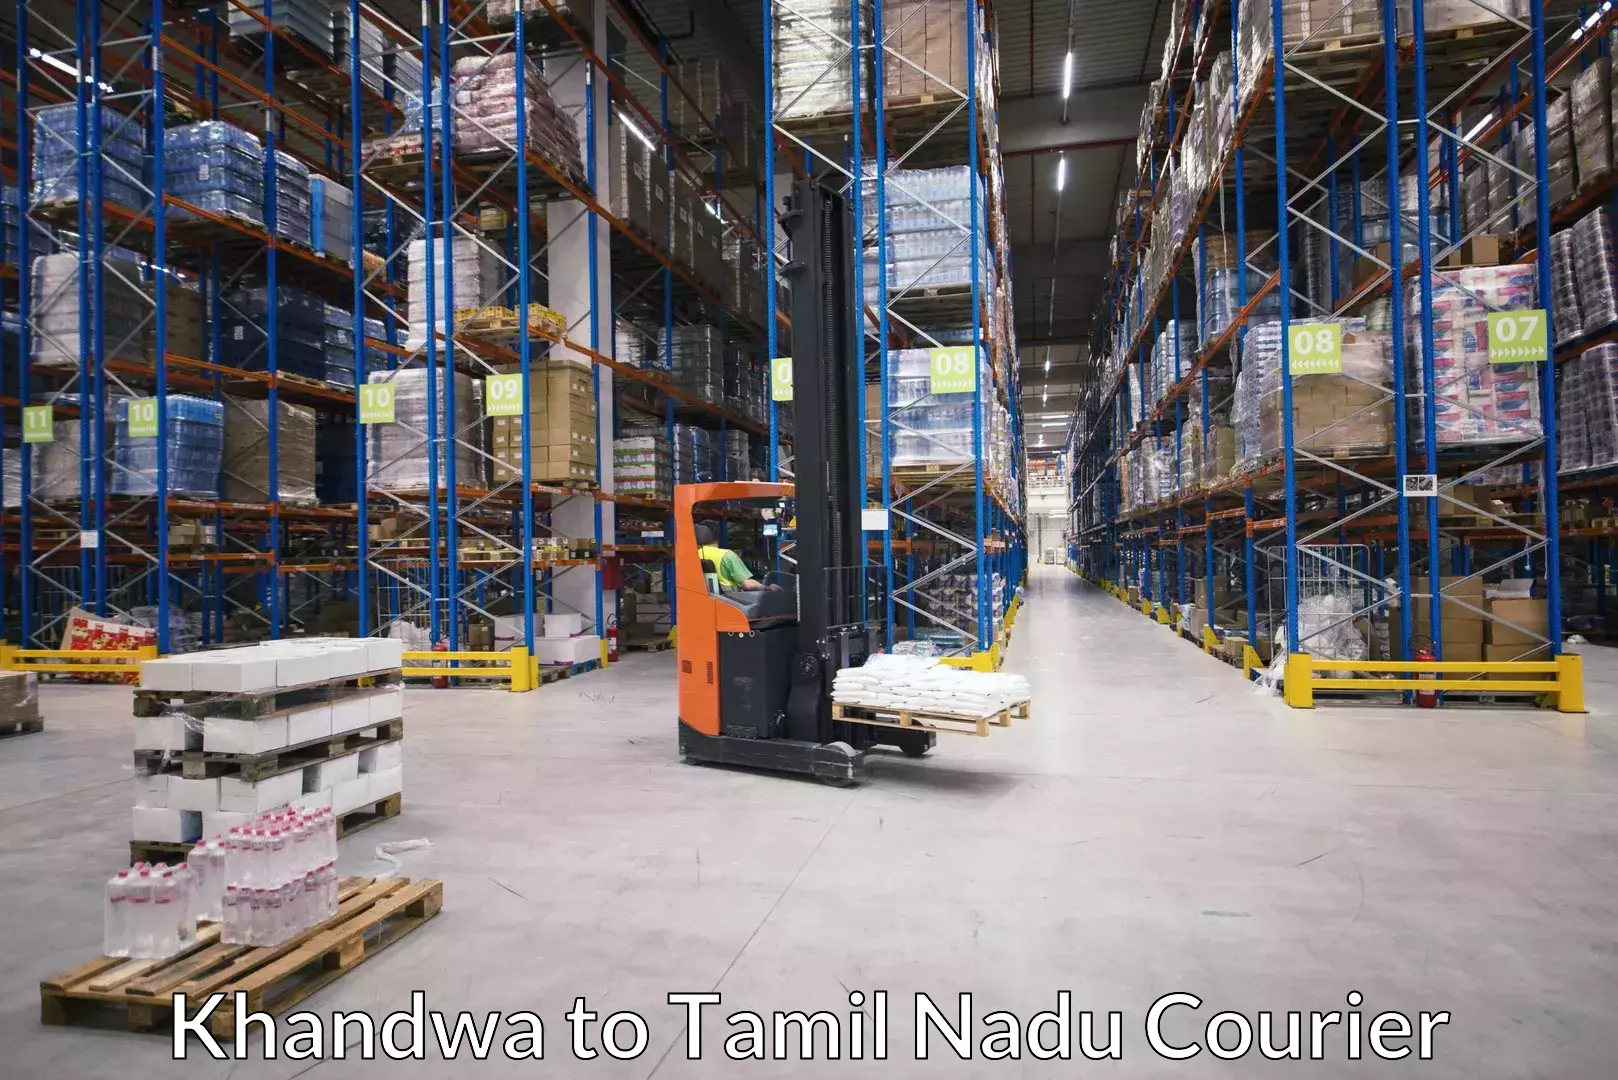 Luggage shipment specialists Khandwa to Ennore Port Chennai